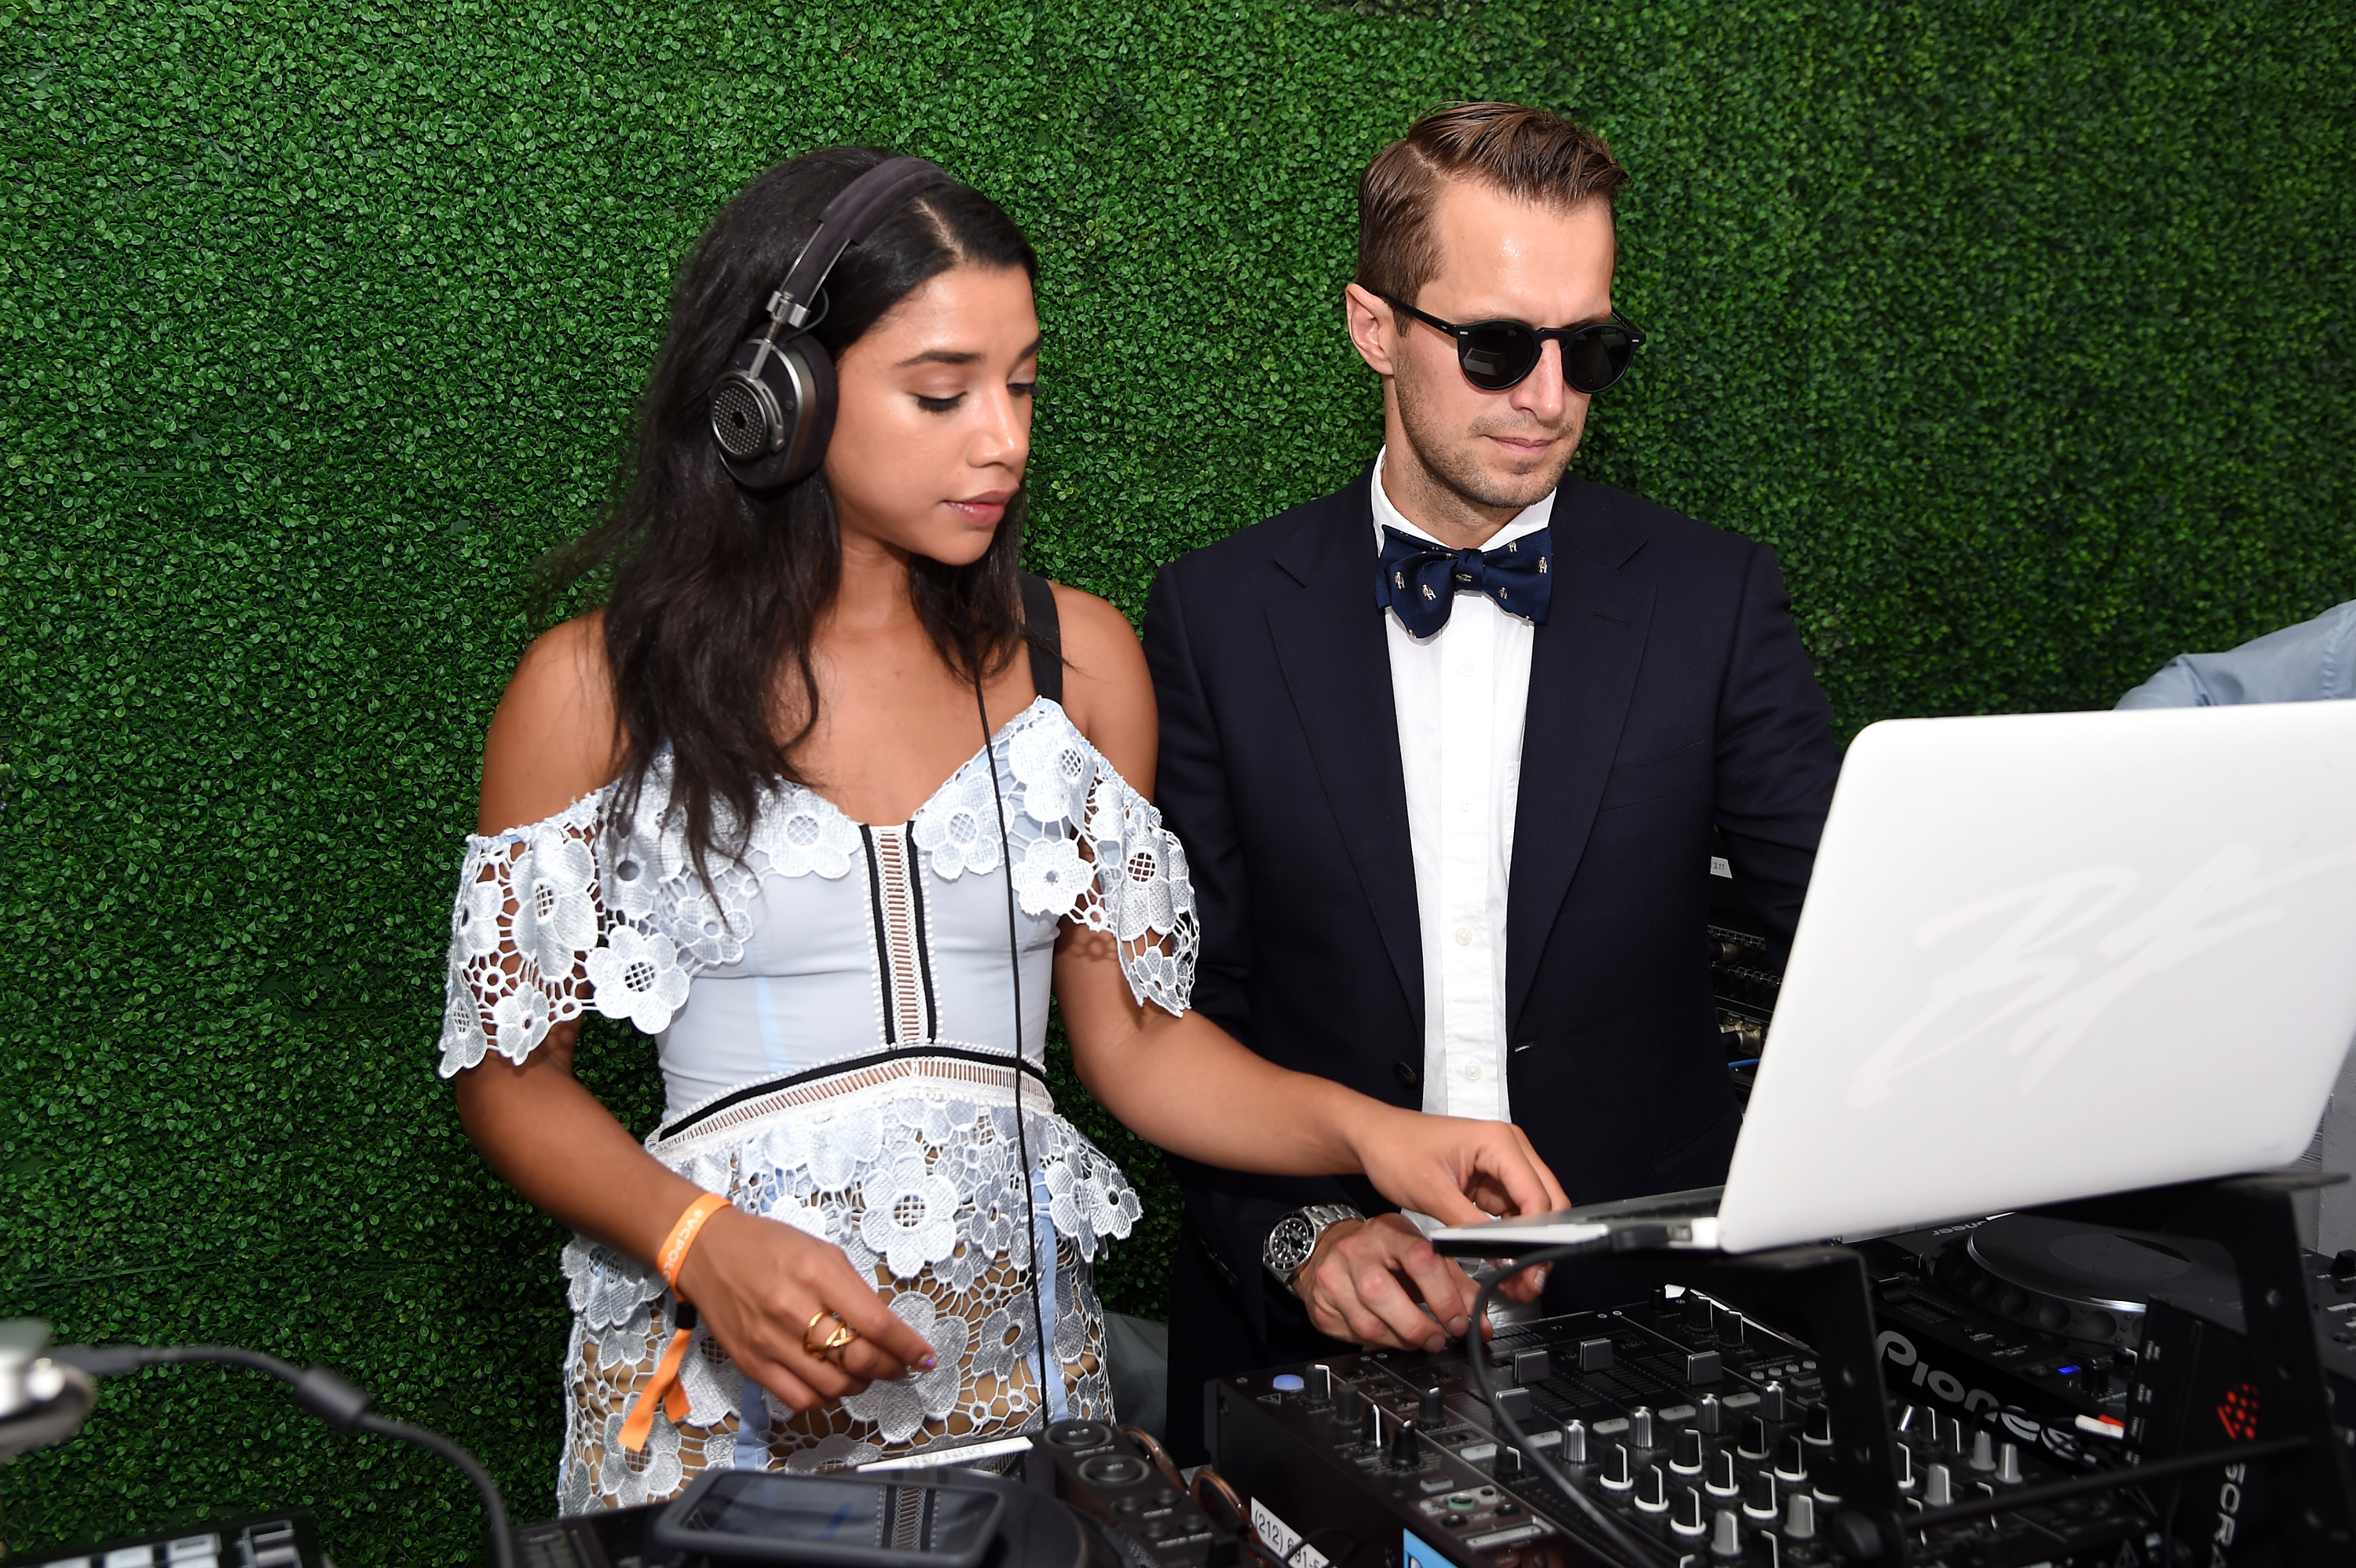 JERSEY CITY, NJ - JUNE 04:  Hannah Bronfman (L) and Brendan Fallis perform during the Ninth Annual Veuve Clicquot Polo Classic at Liberty State Park on June 4, 2016 in Jersey City, New Jersey.  (Photo by Jamie McCarthy/Getty Images for Veuve Clicquot)